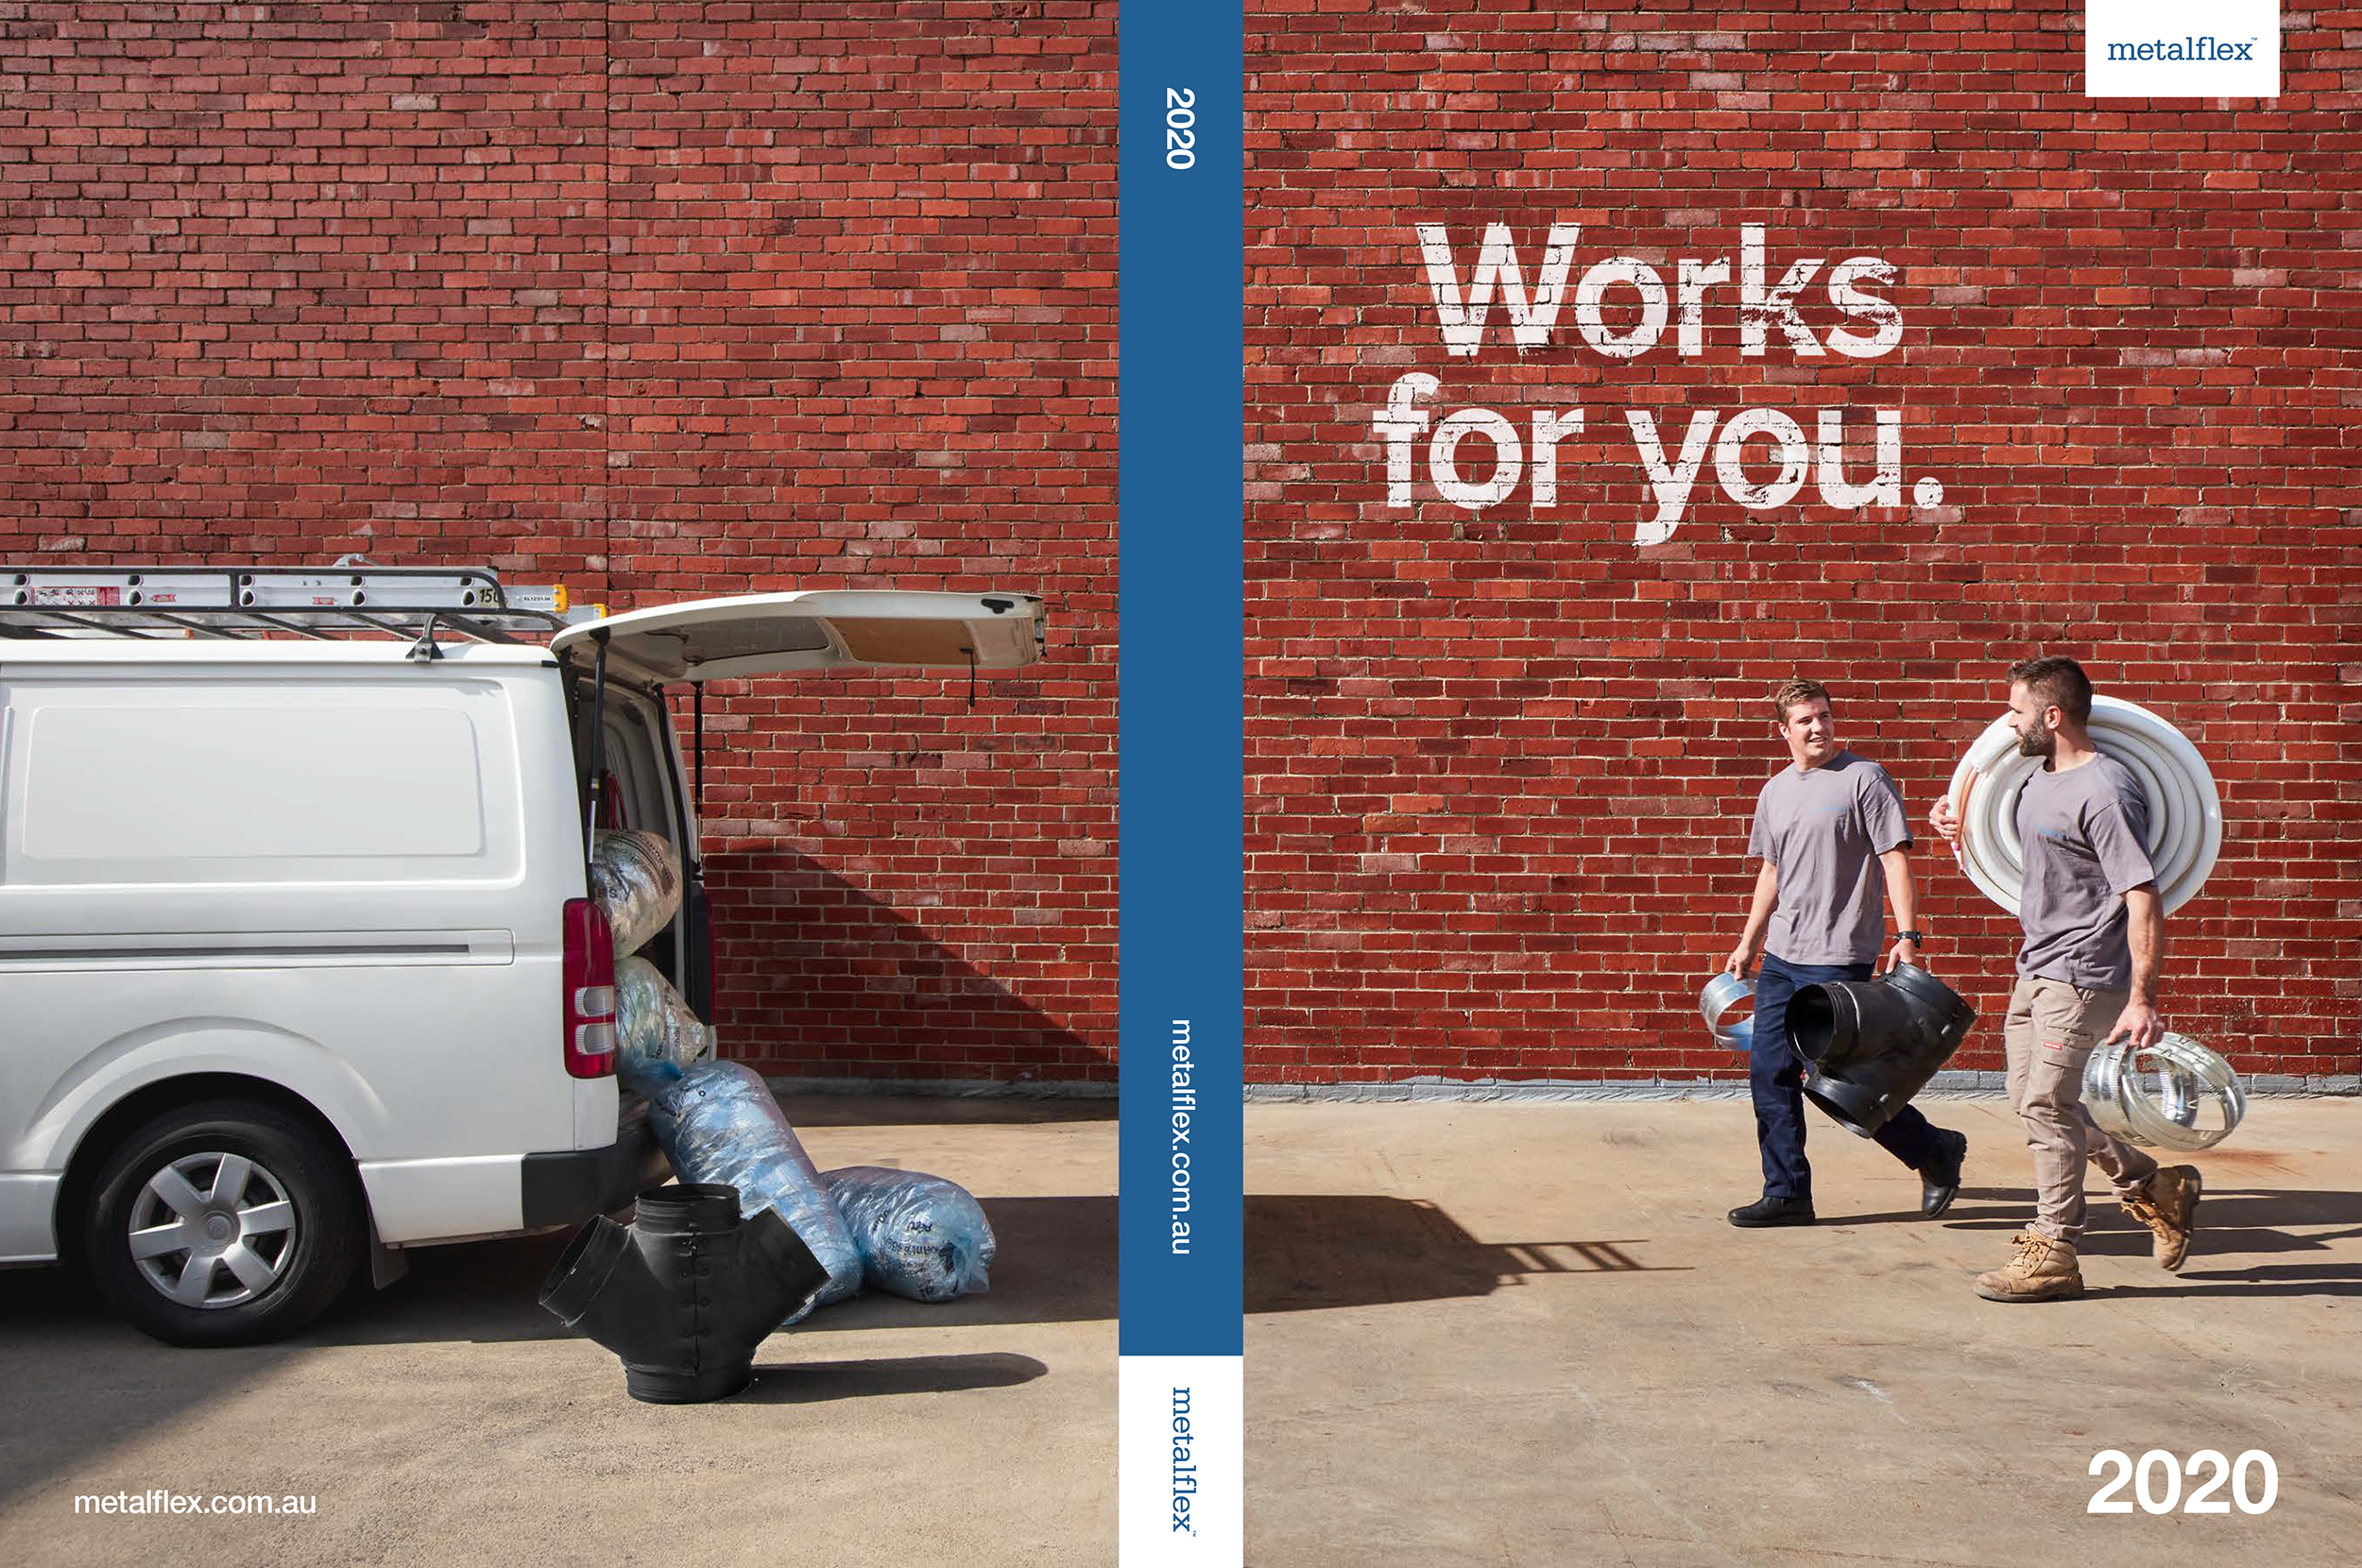 Campaign-thom-rigney-professional-photographer-advertising-commissioned-reece-plumbing-melbourne-australia-tradesman-013